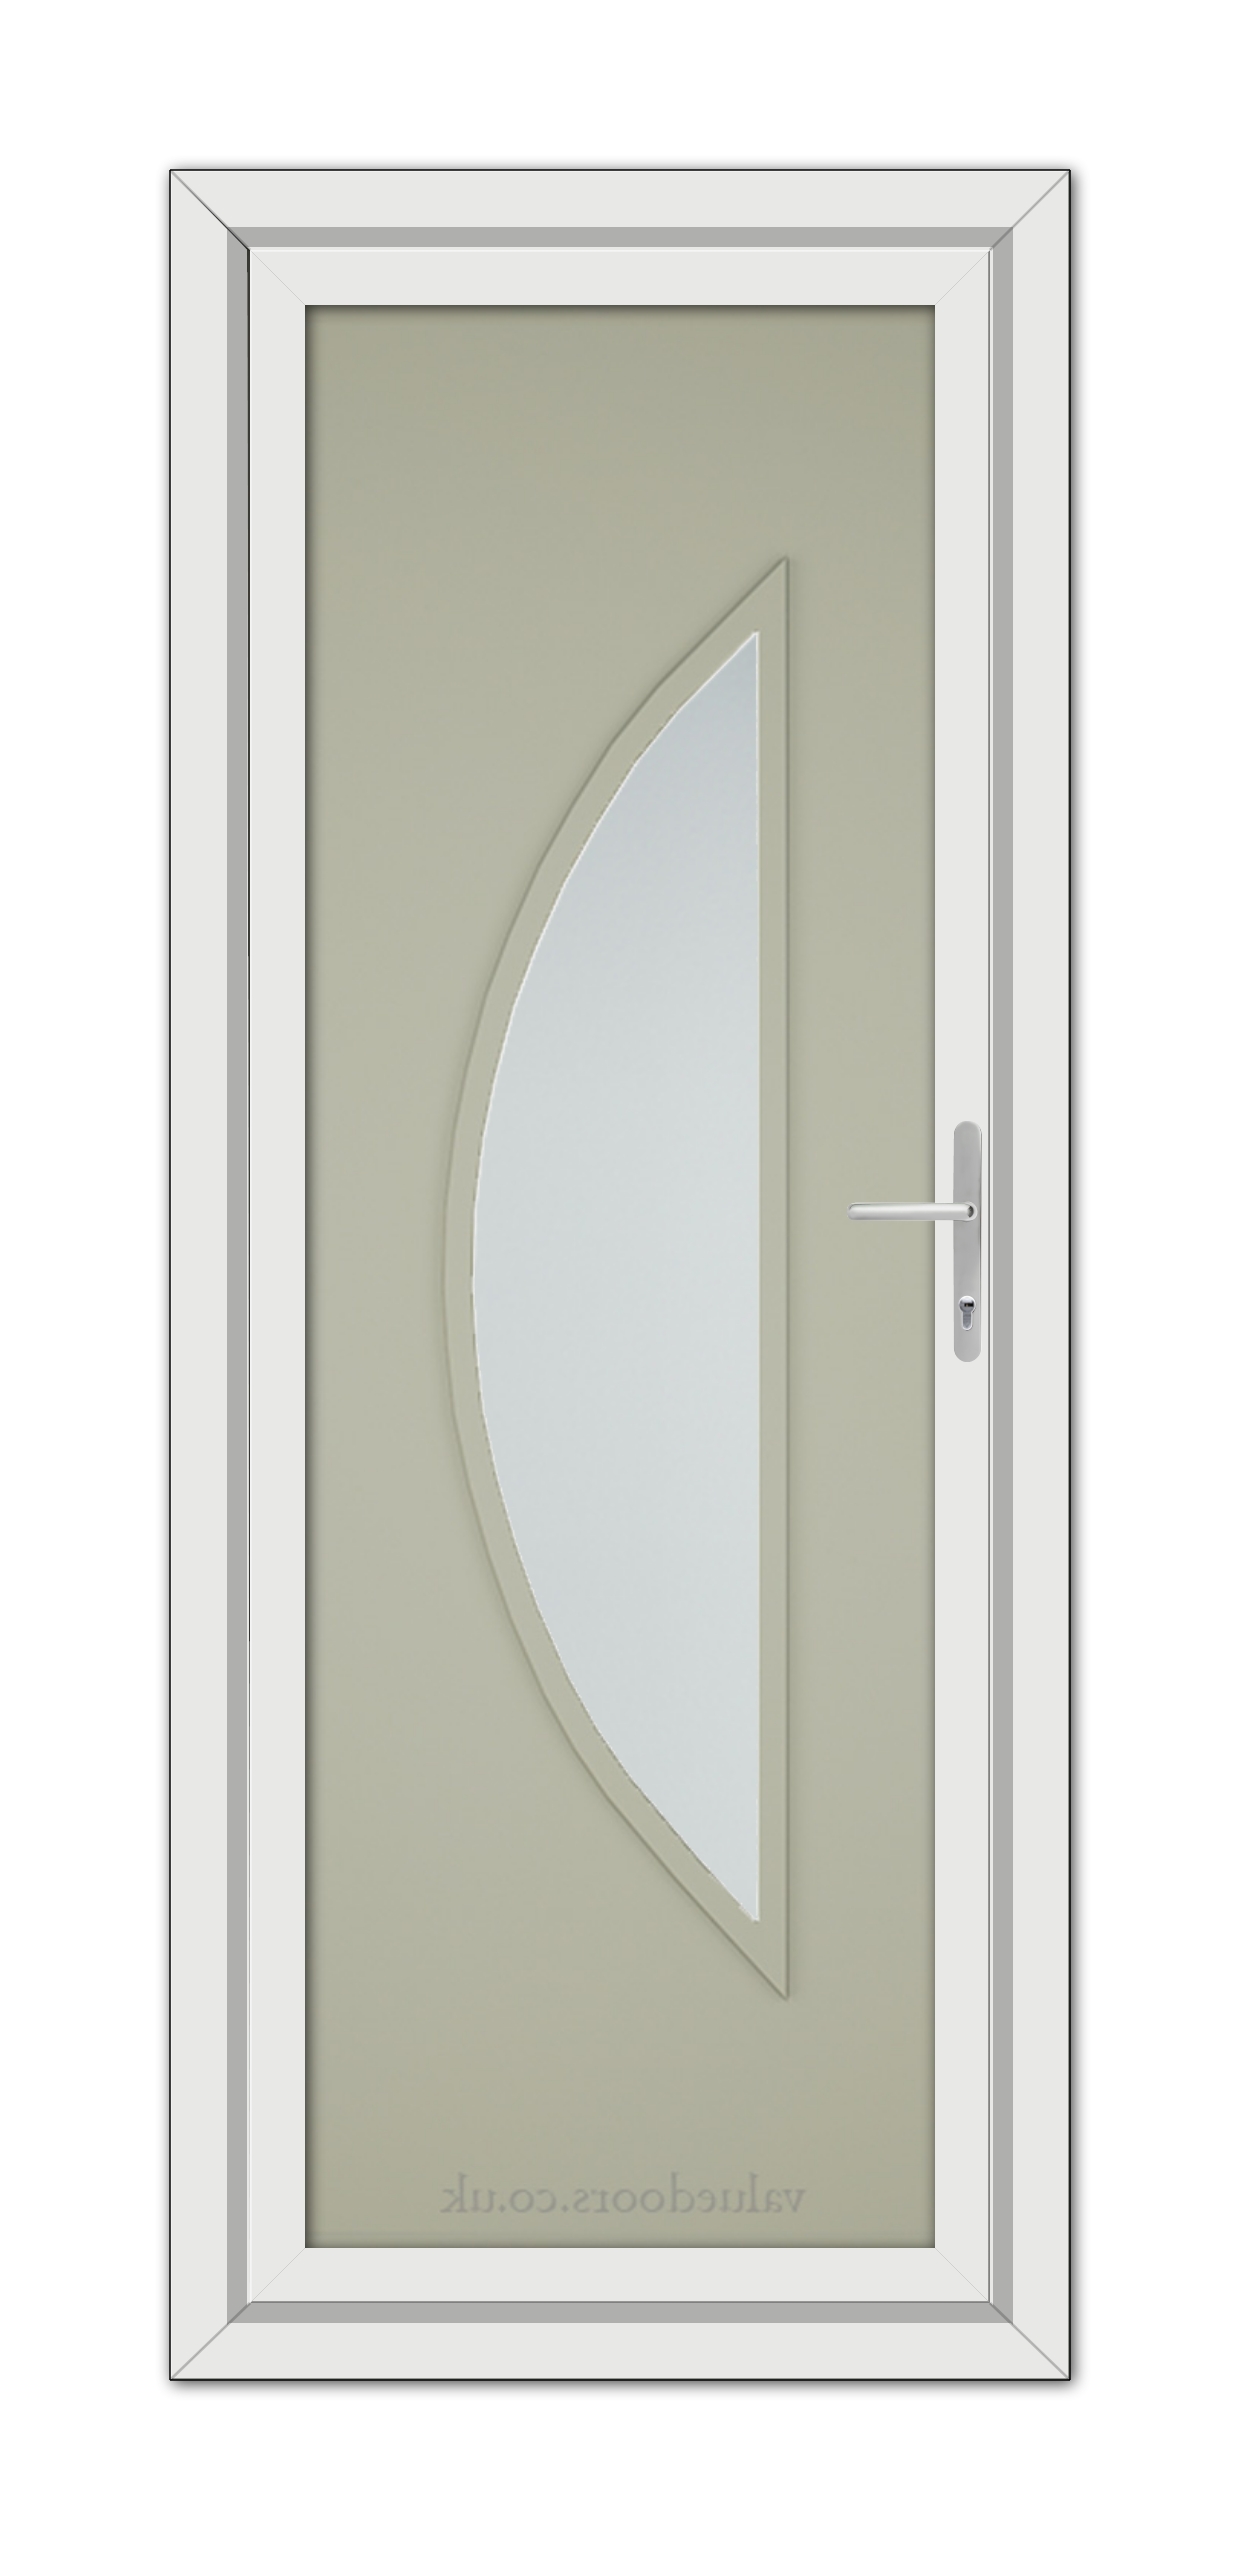 Agate Grey Modern 5051 uPVC door with a frosted glass panel shaped like a leaf, featuring a modern handle on the right side.